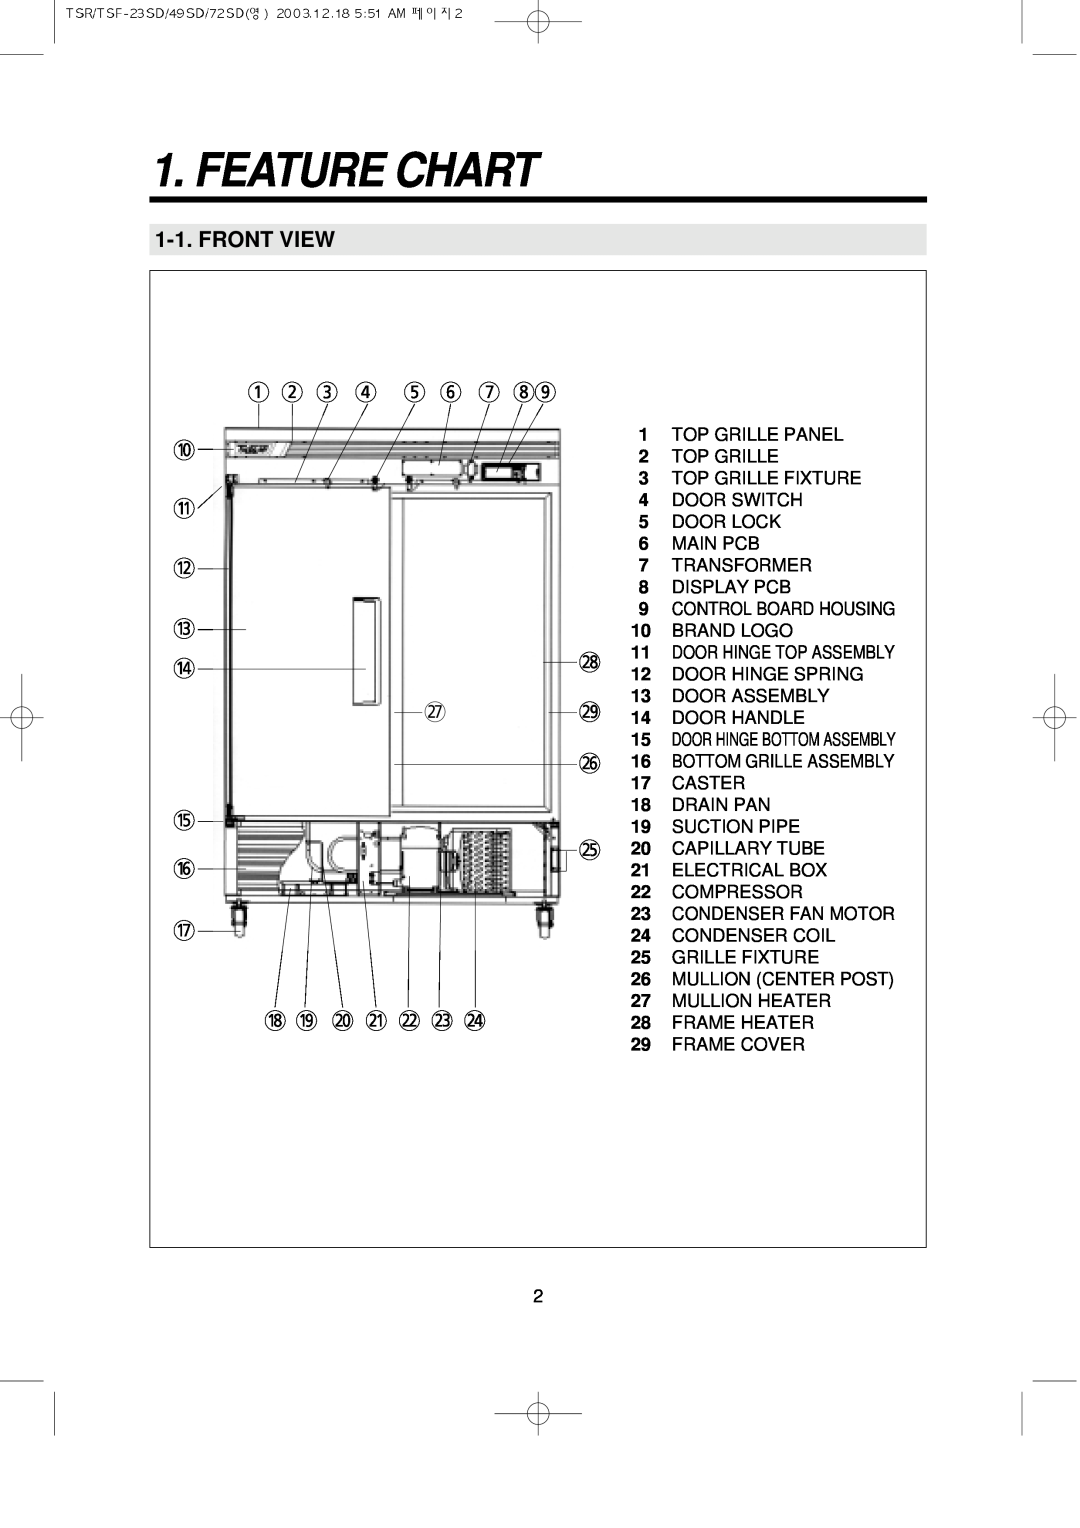 Turbo Air TSR-72SD Feature Chart, Front View, Top Grille Panel, Top Grille Fixture, Door Switch, Door Lock, Main Pcb 